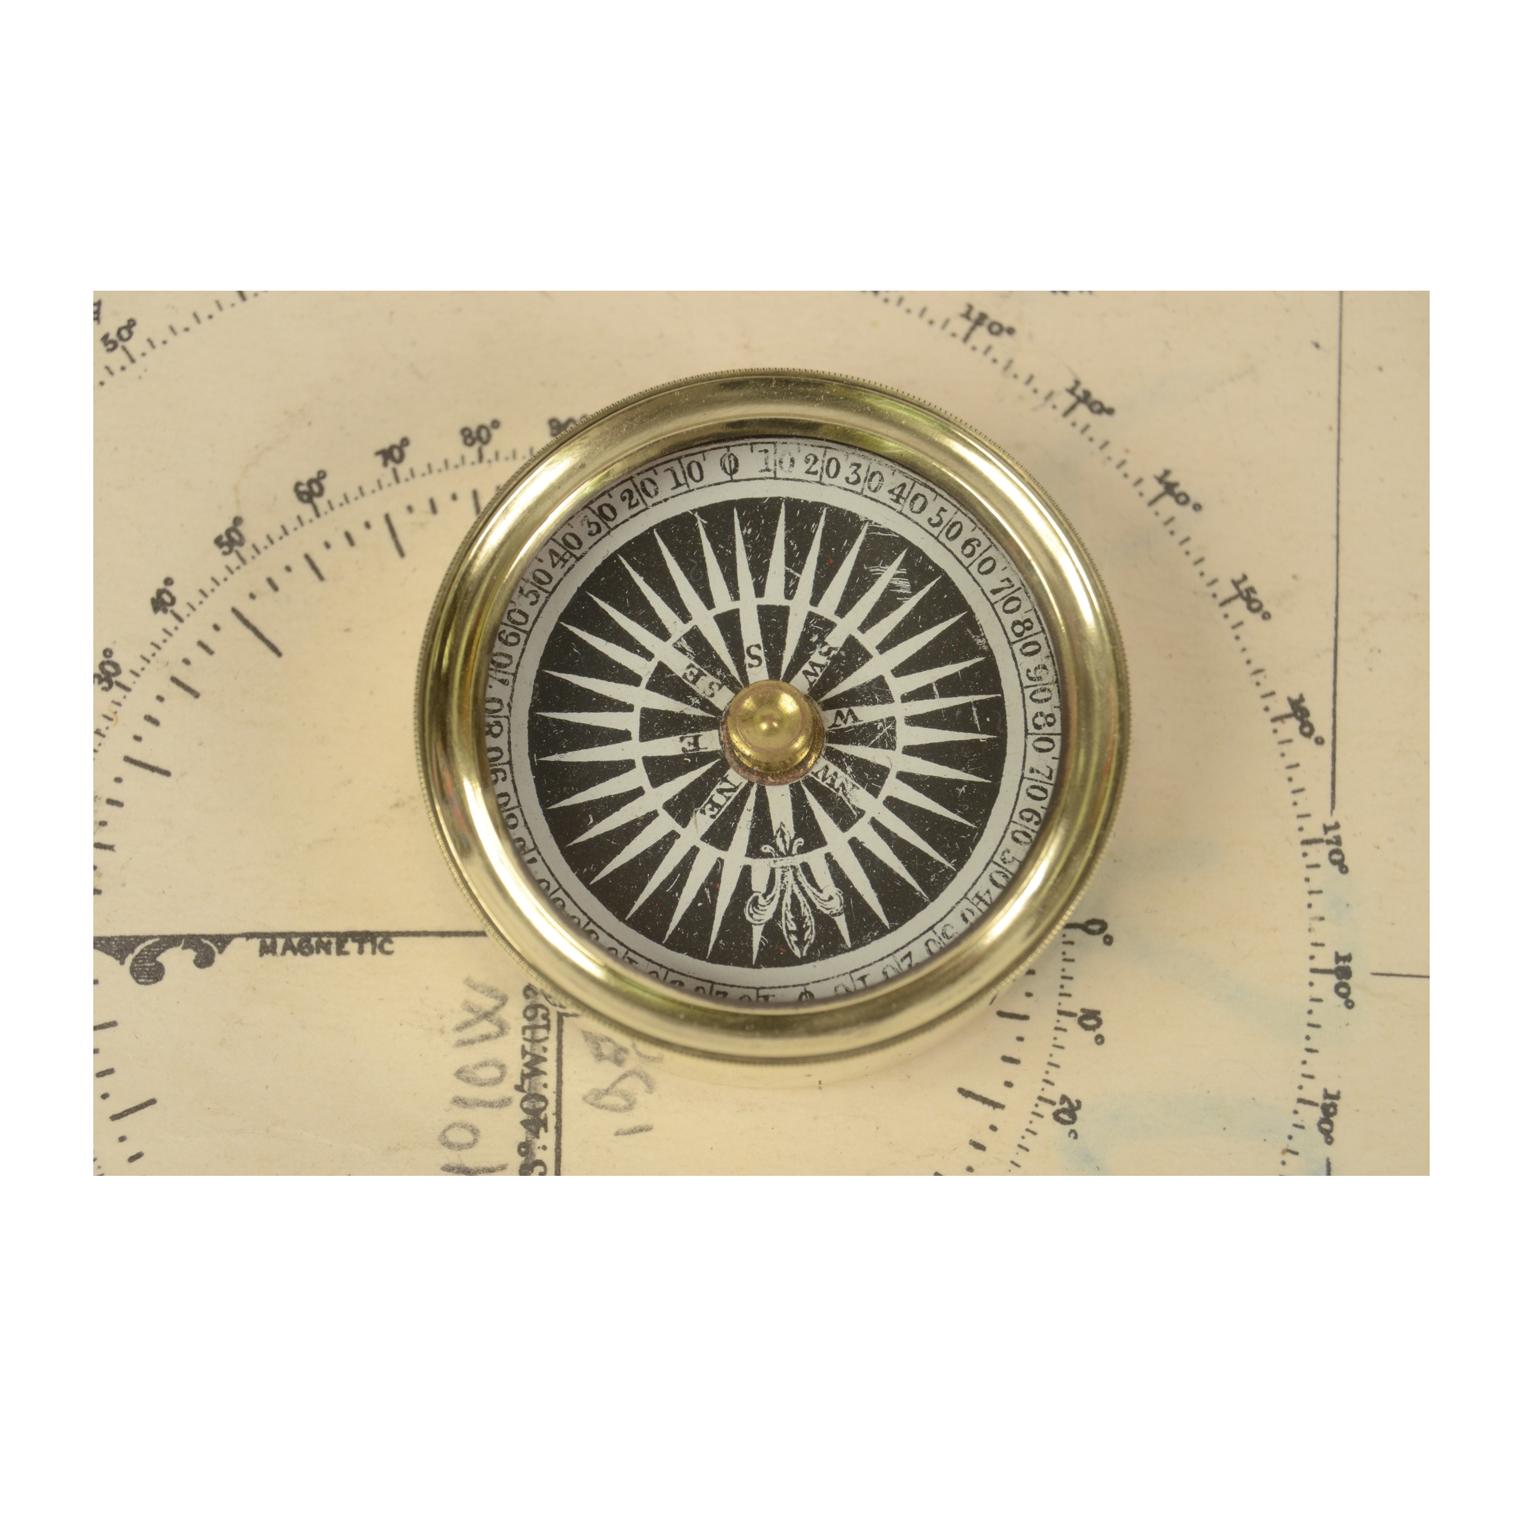 British Nautical Brass Compass Made in the Mid-19th Century